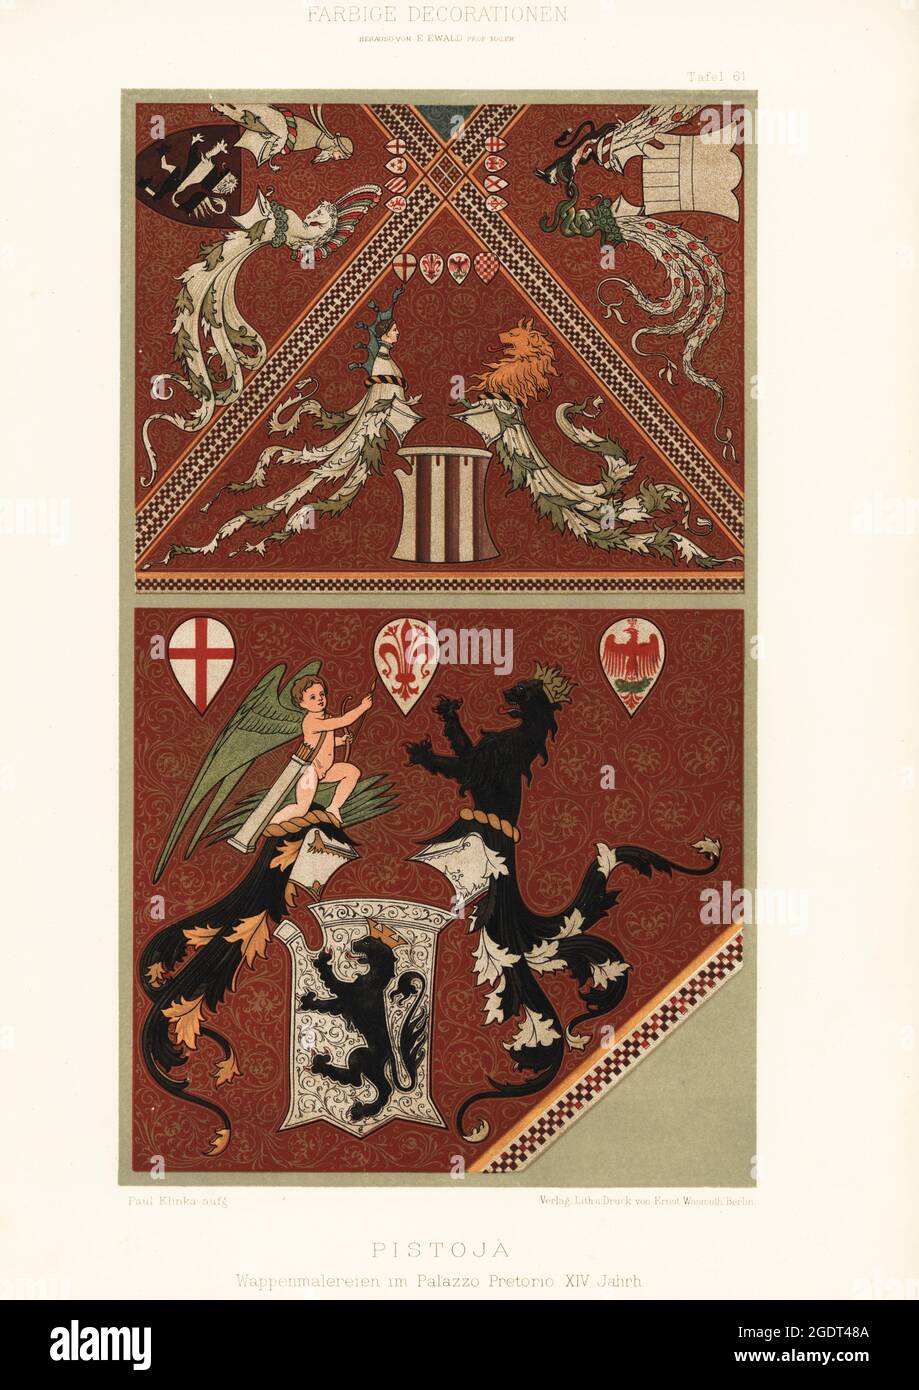 Paintings of coats of arms in the Palazzo Pretorio, Pistoia, Italy, 14th century. Wappenmalerei im Palazzo Pretorio, Pistoja, XIV Jahrh. Chromolithograph by Paul Klinka from Ernst Ewald’s Farbige decorationen, alter und never Zeit (Color decoration, ancient and new eras), Ernst Wasmuth, Berlin, 1889. Stock Photo